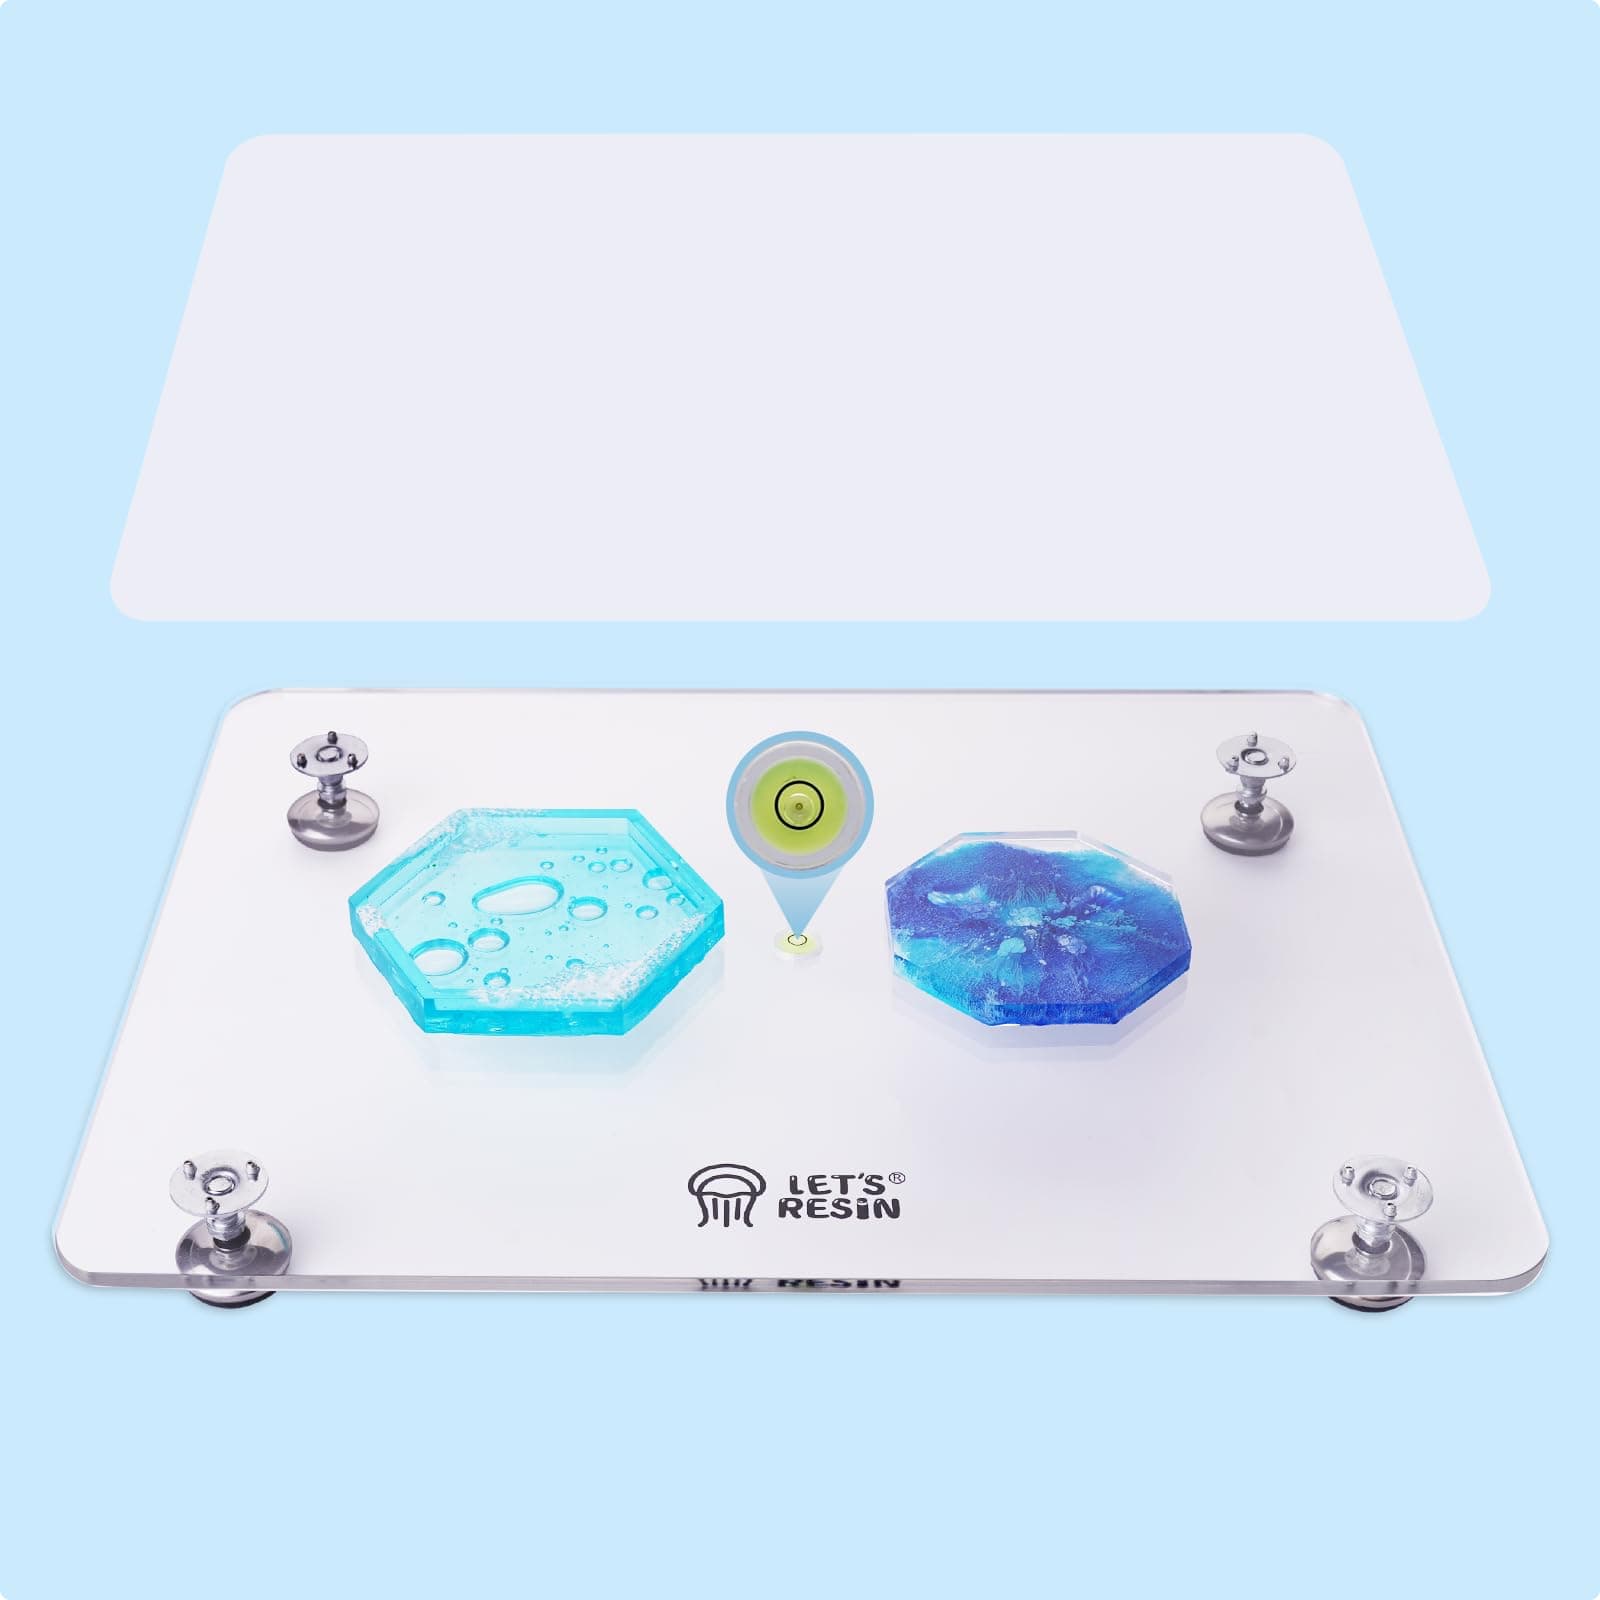 Leveling Board for Epoxy Resin & Art & Countertop, Resin Leveling Table,  Adjustable Self Leveling Epoxy Resin Table